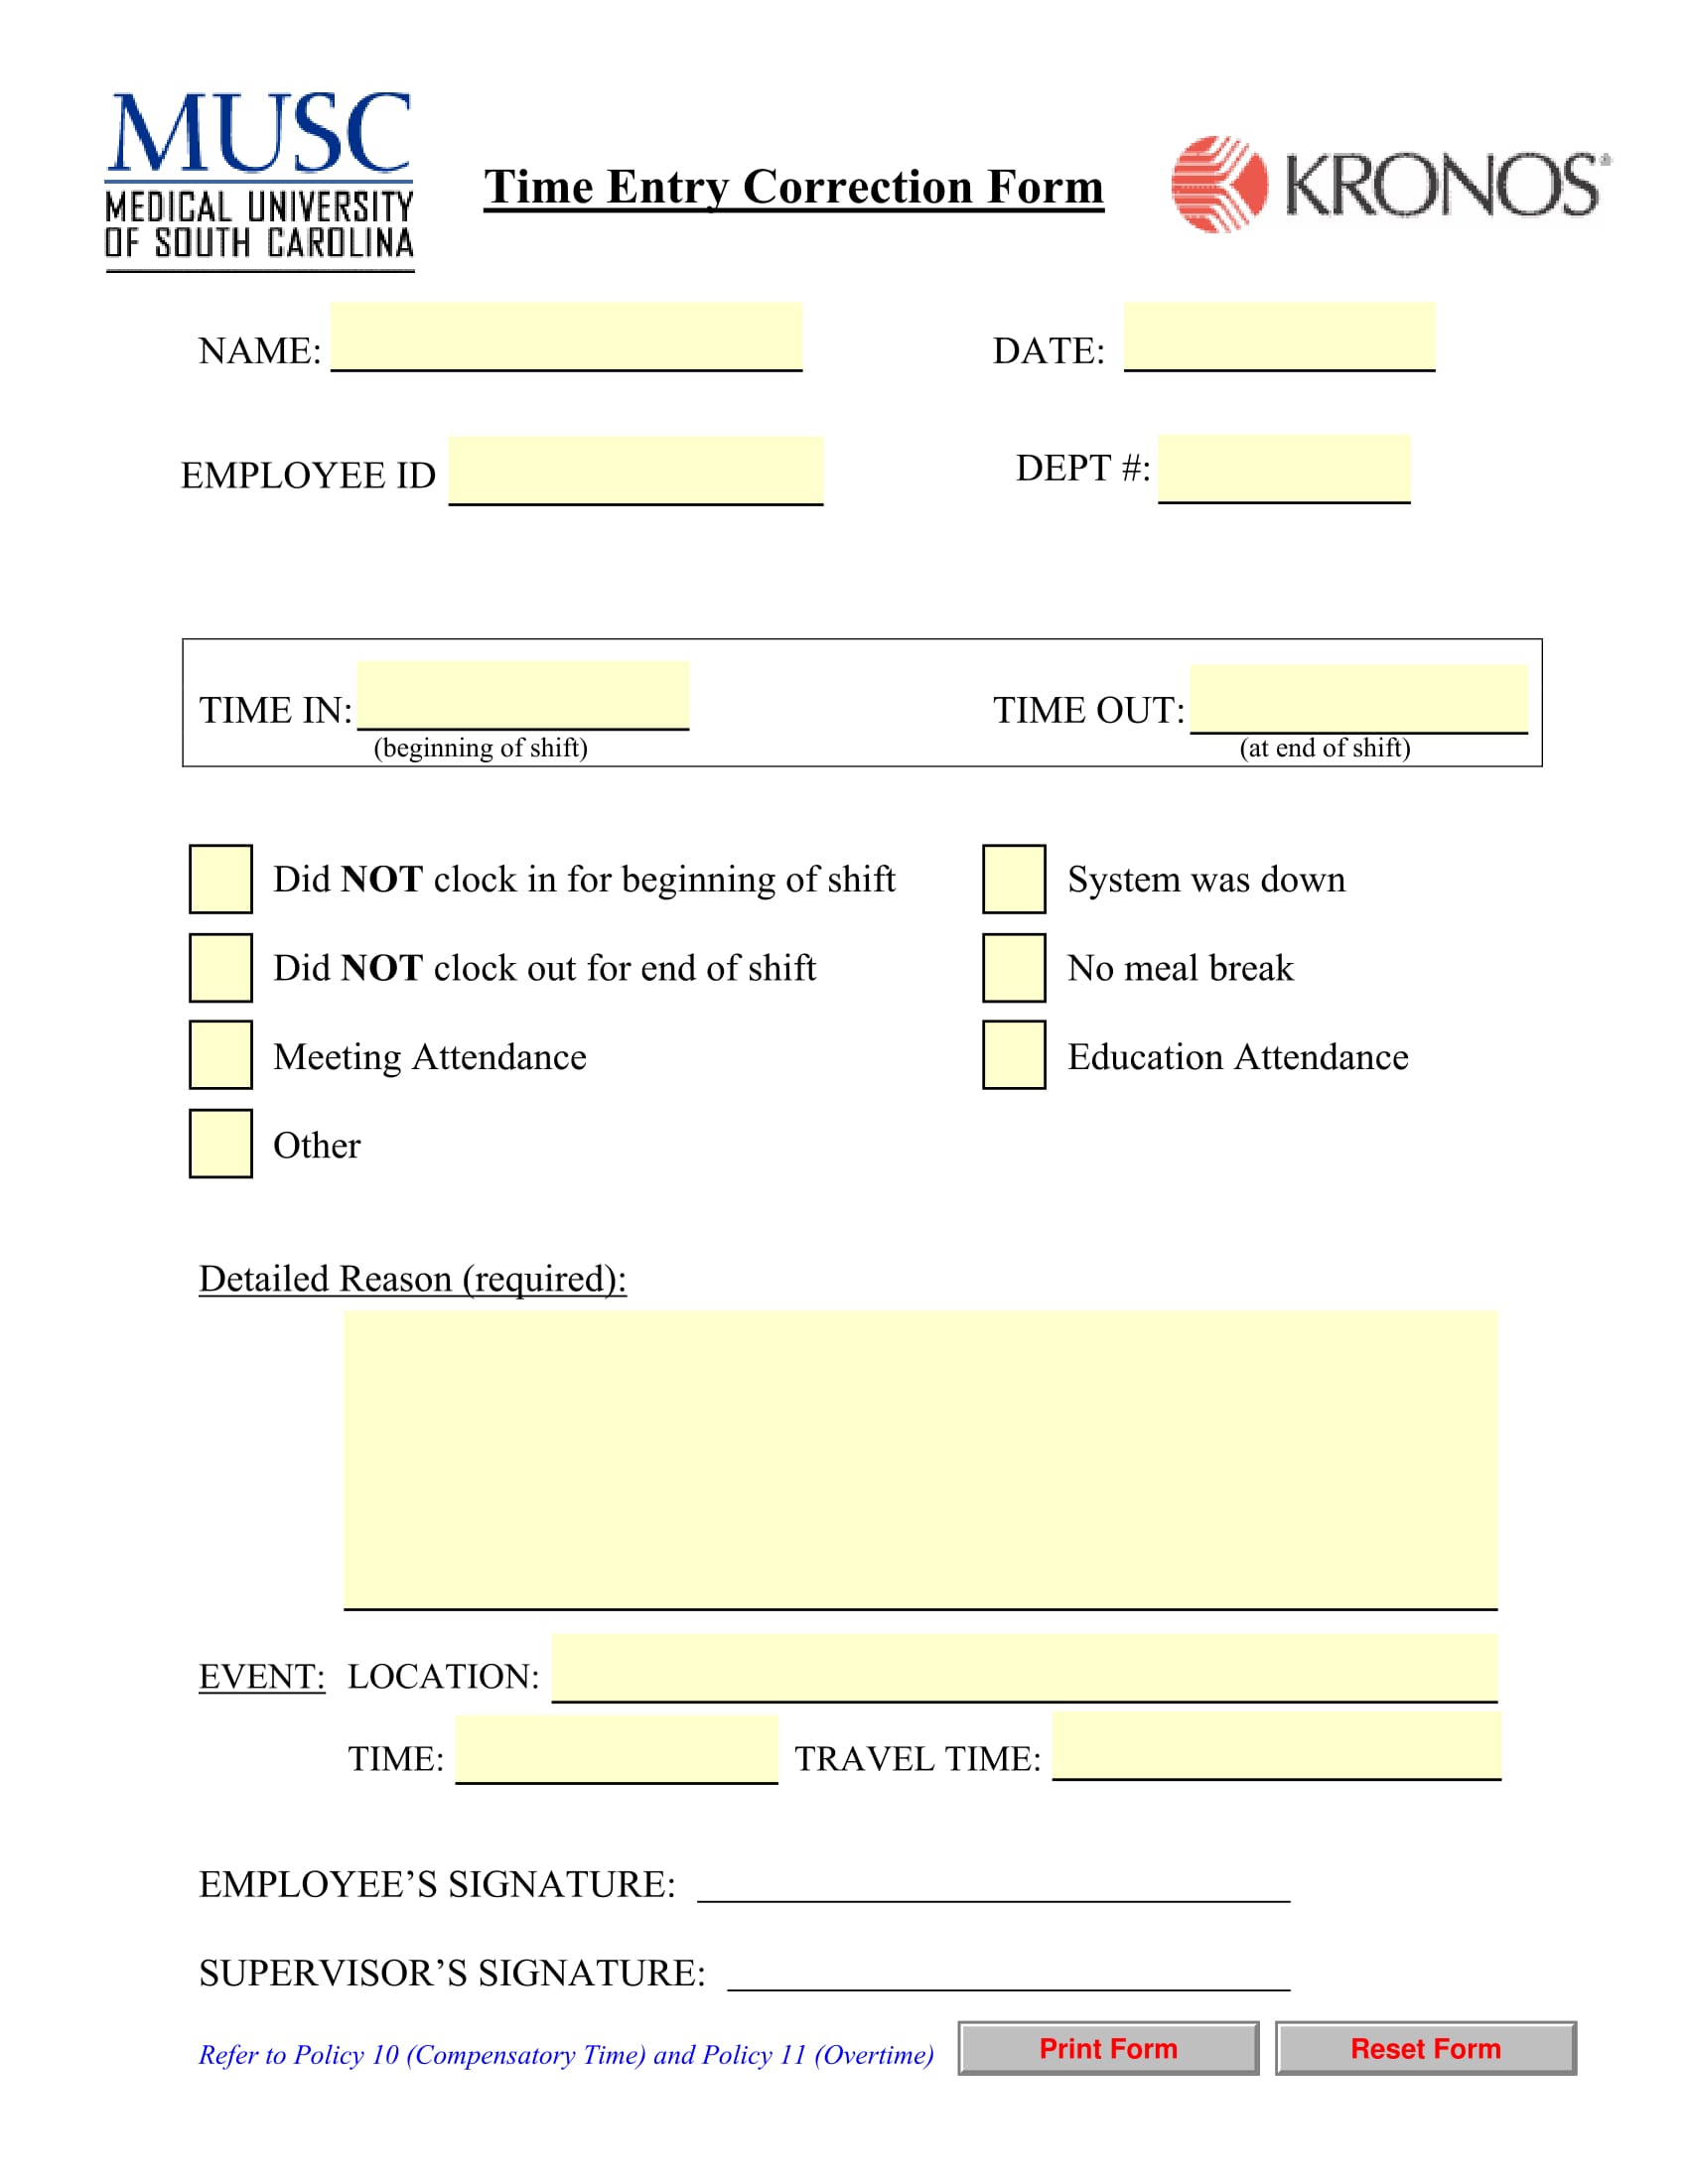 employee time entry correction form 1